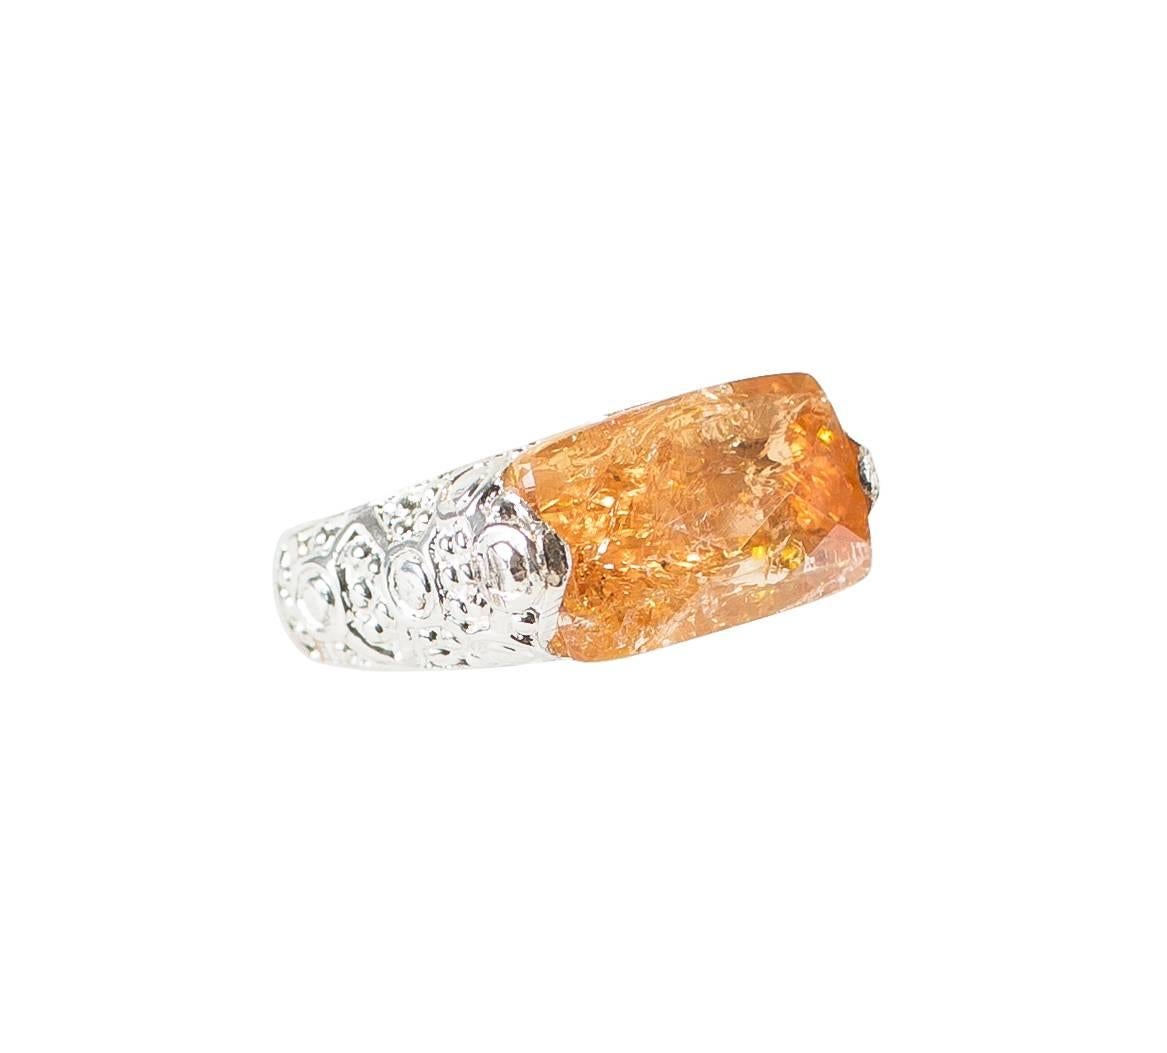 Fabulous Orange Brazilian Imperial Topaz set East-West in fancy scrool work patterned Sterling Silver Ring.  This Imperial Topaz came straight from Ouro Preto, Minas Gerais, Brazil.  The gemstone is 15x9mm and has a checkerboard table.  Size 7.
The